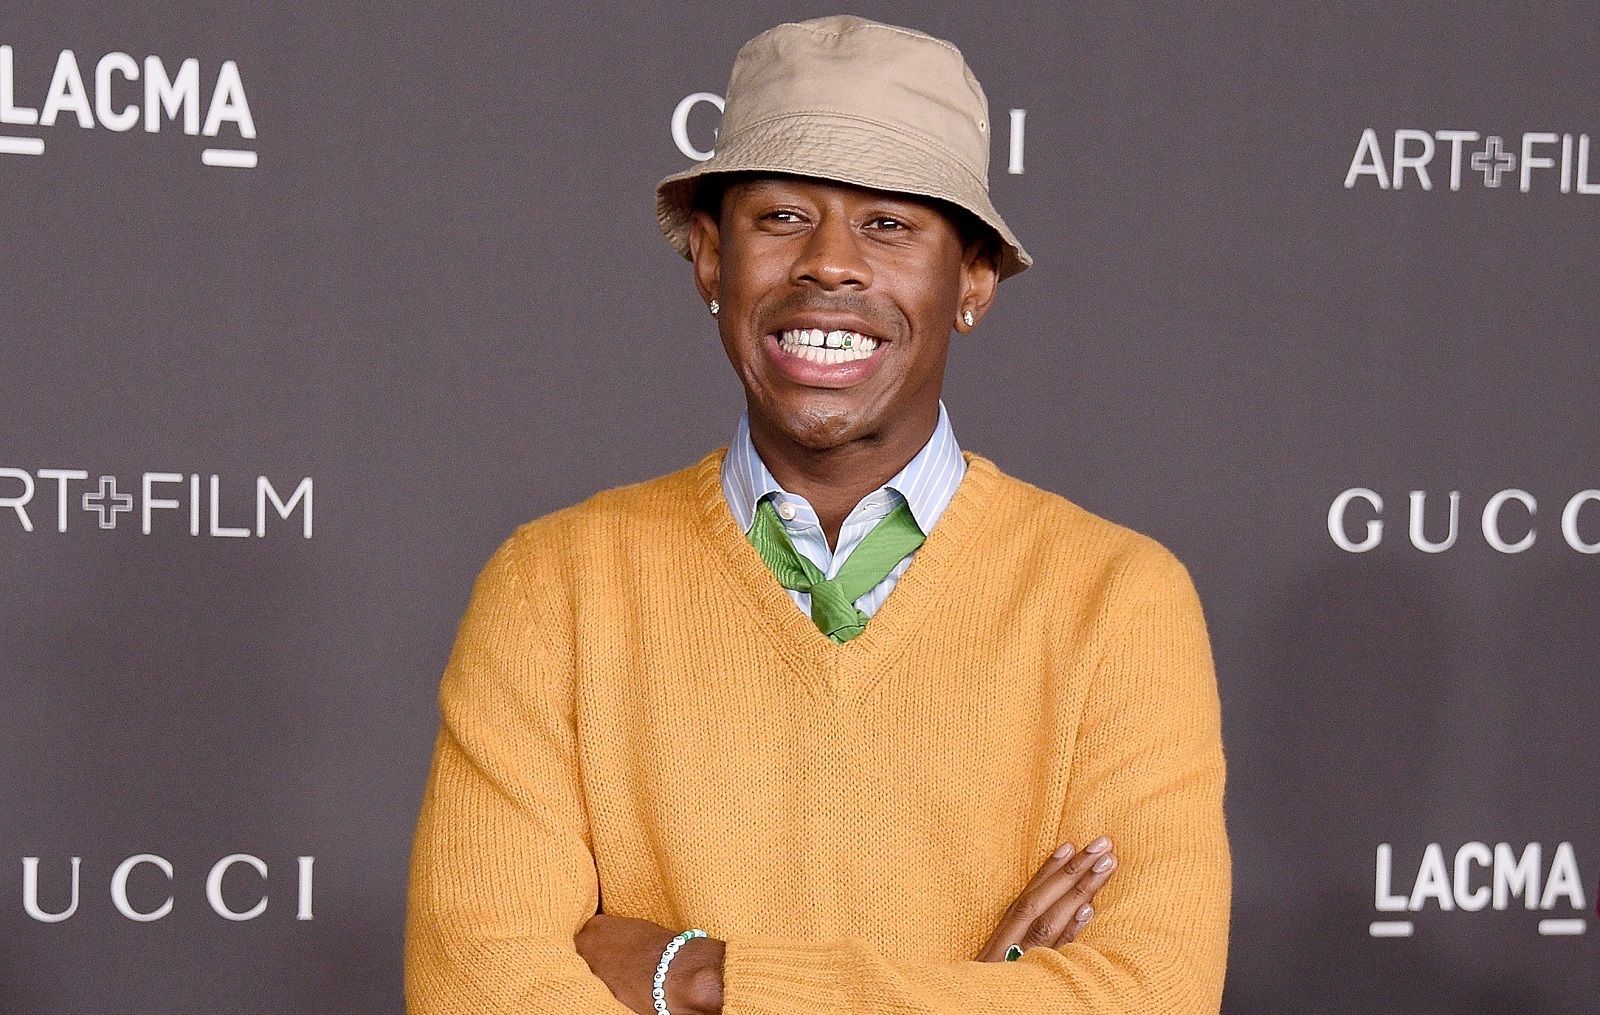 Tyler's year 2019 saw the ultimate success of Tyler, The Creator